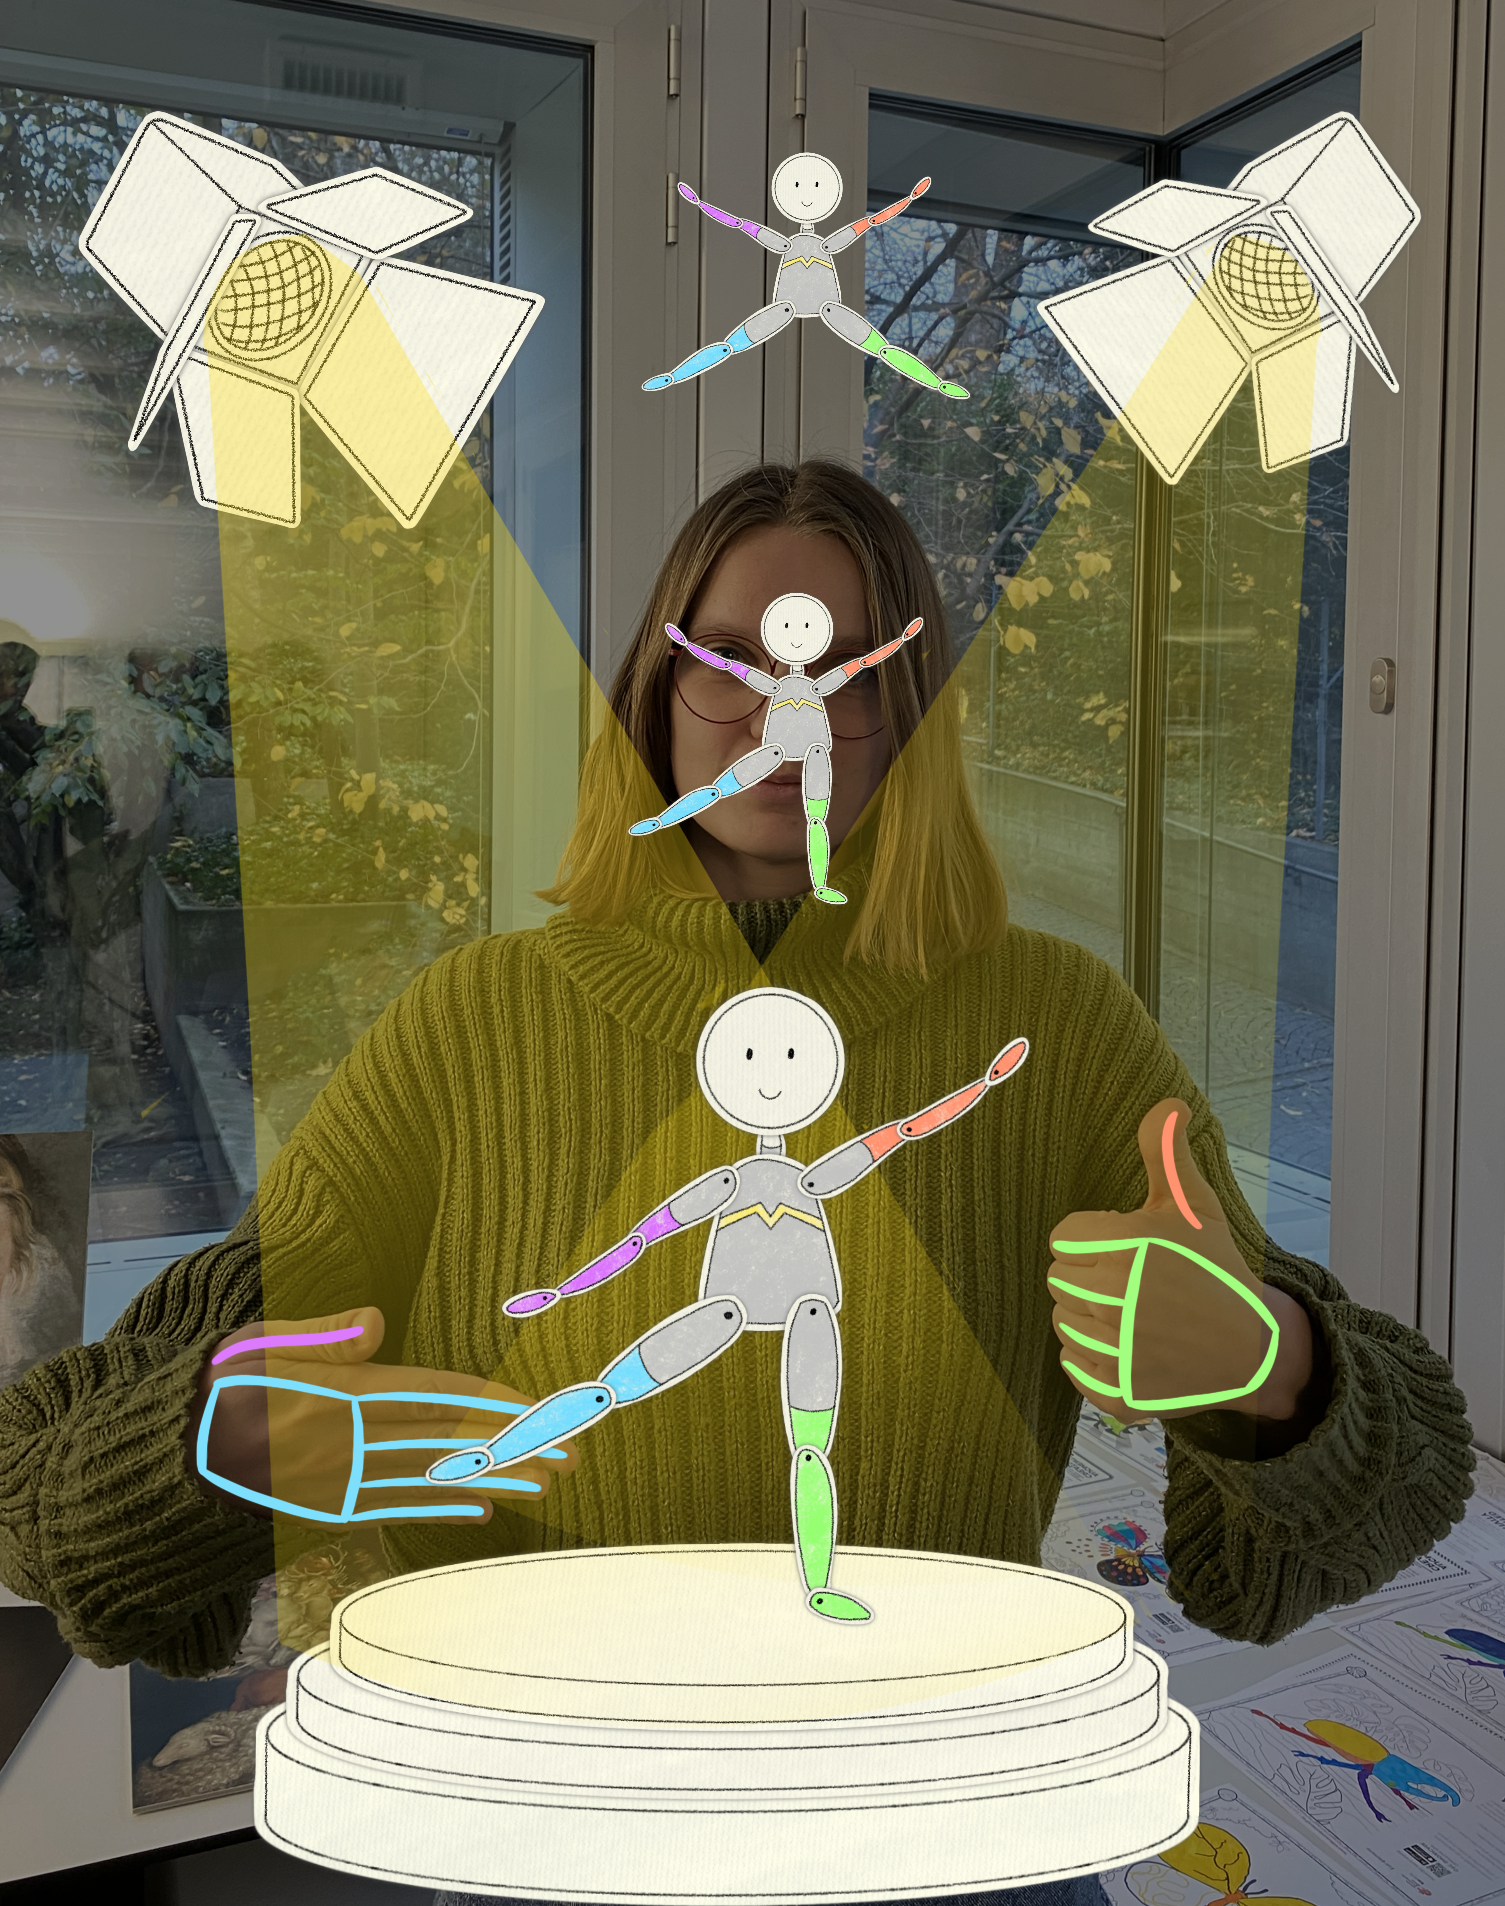 A puppet in paper, with colored limbs, is on a stage, in the bottom of the screen. Other puppets with different poses are falling from the ceiling. The player is manipulating the puppet with hand gestures. The fingers of the player's hands are colored according to the limb of the puppet they control.